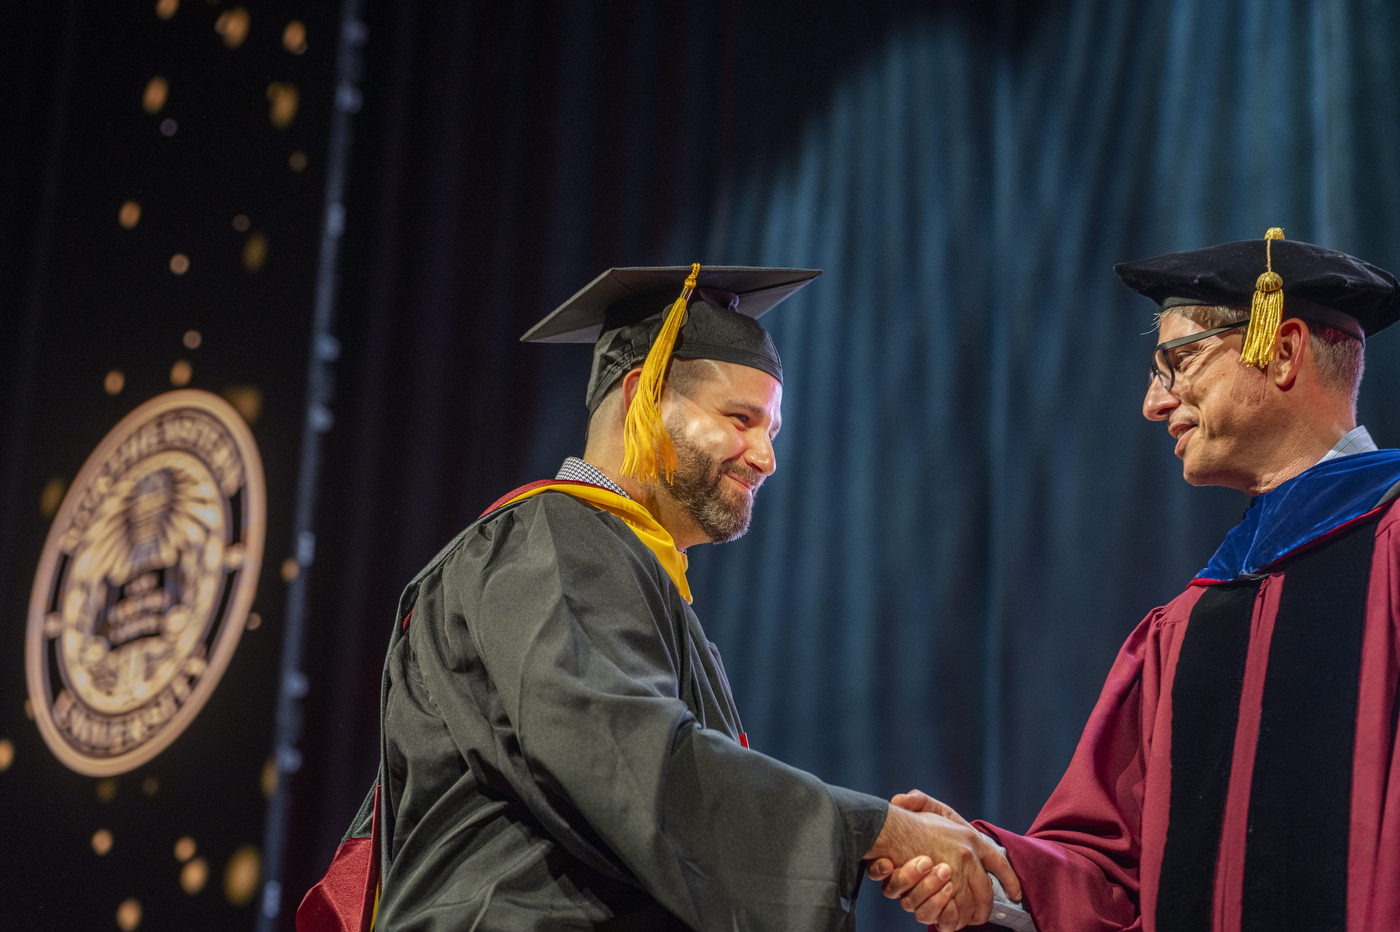 A graduate shaking hands with a faculty member on stage.